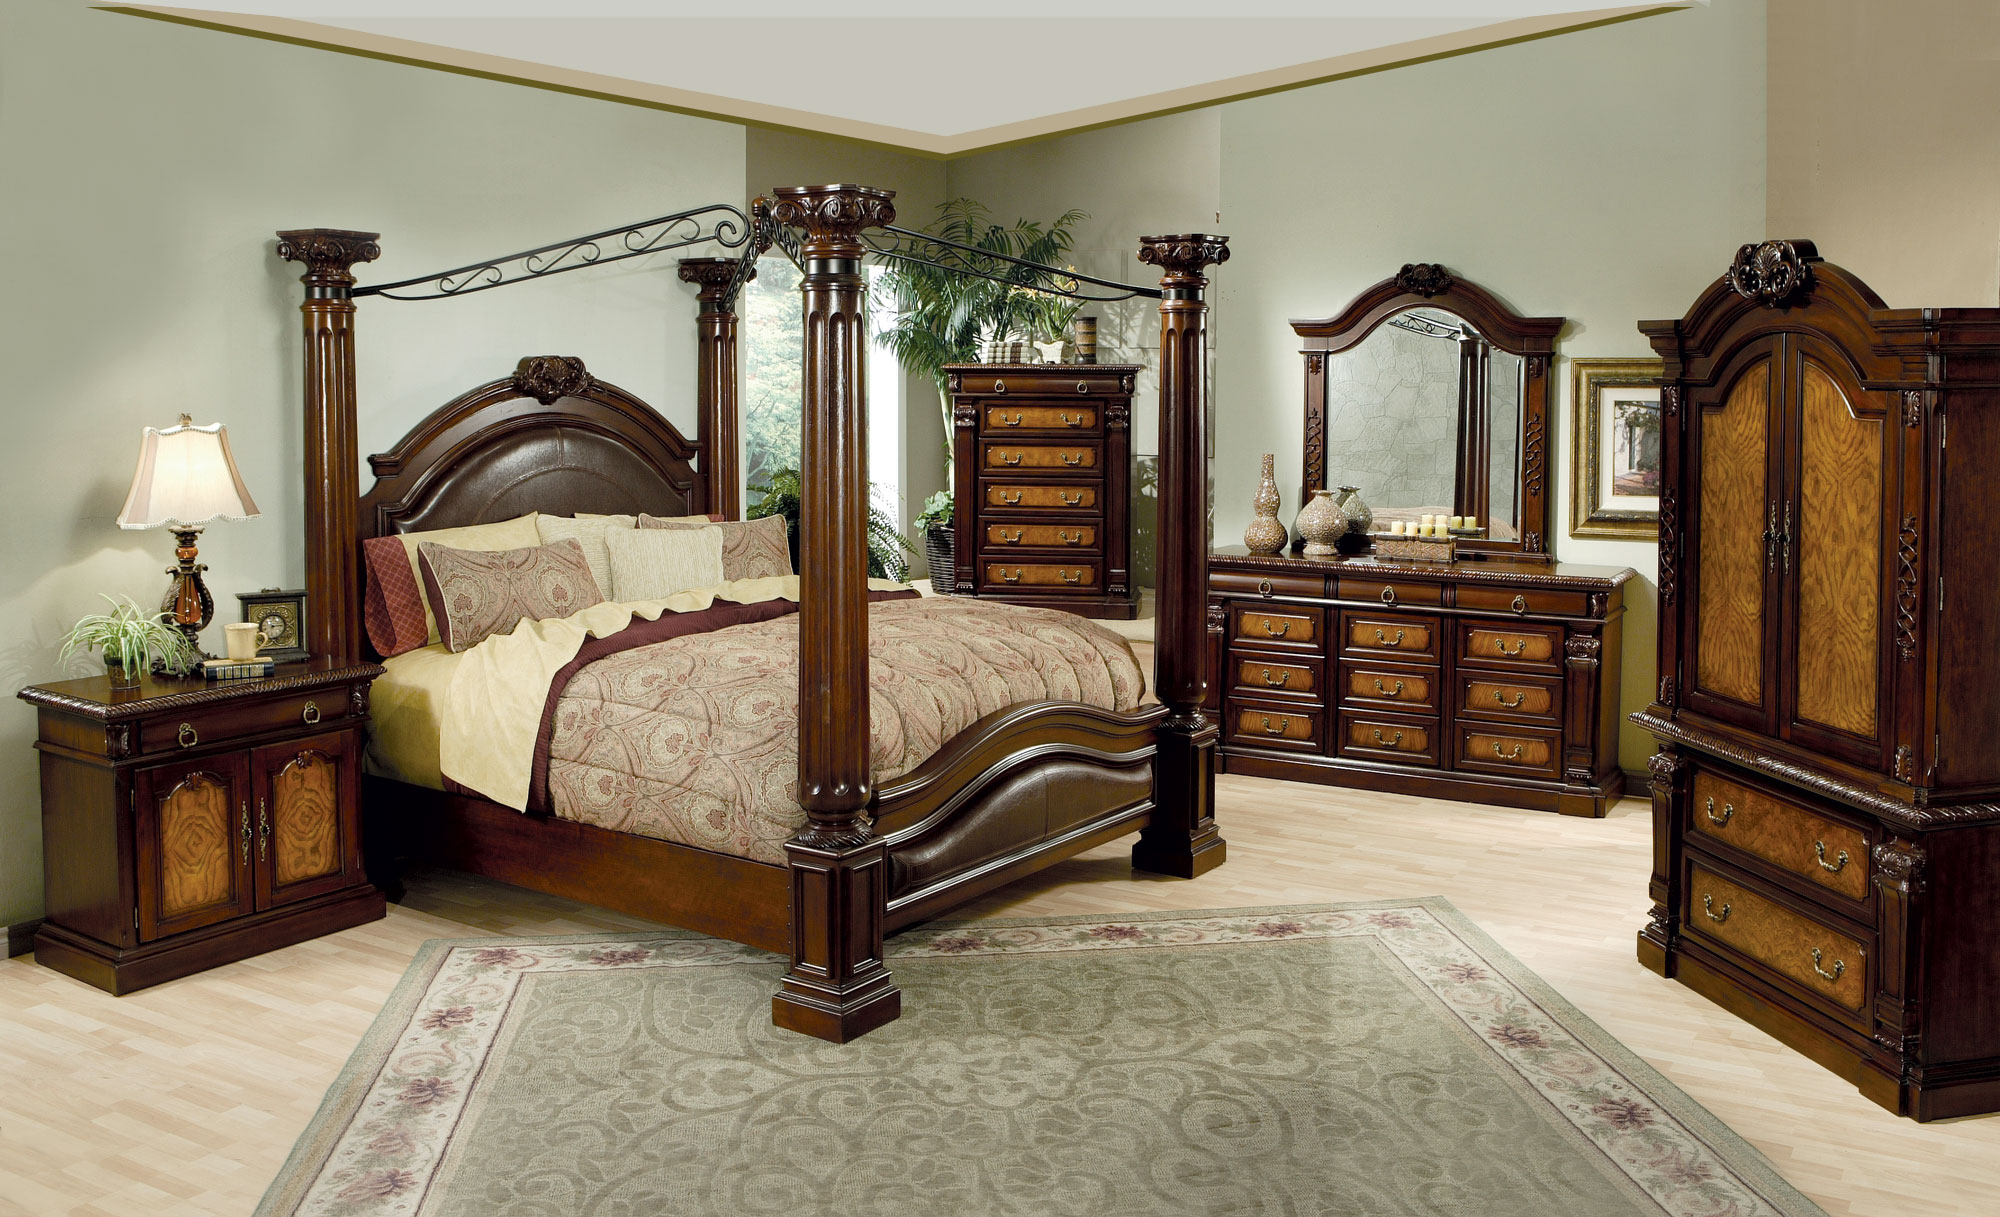 Bedroom Furniture Dressers Sleigh Beds Nightstands Reseda Ca throughout sizing 2000 X 1217